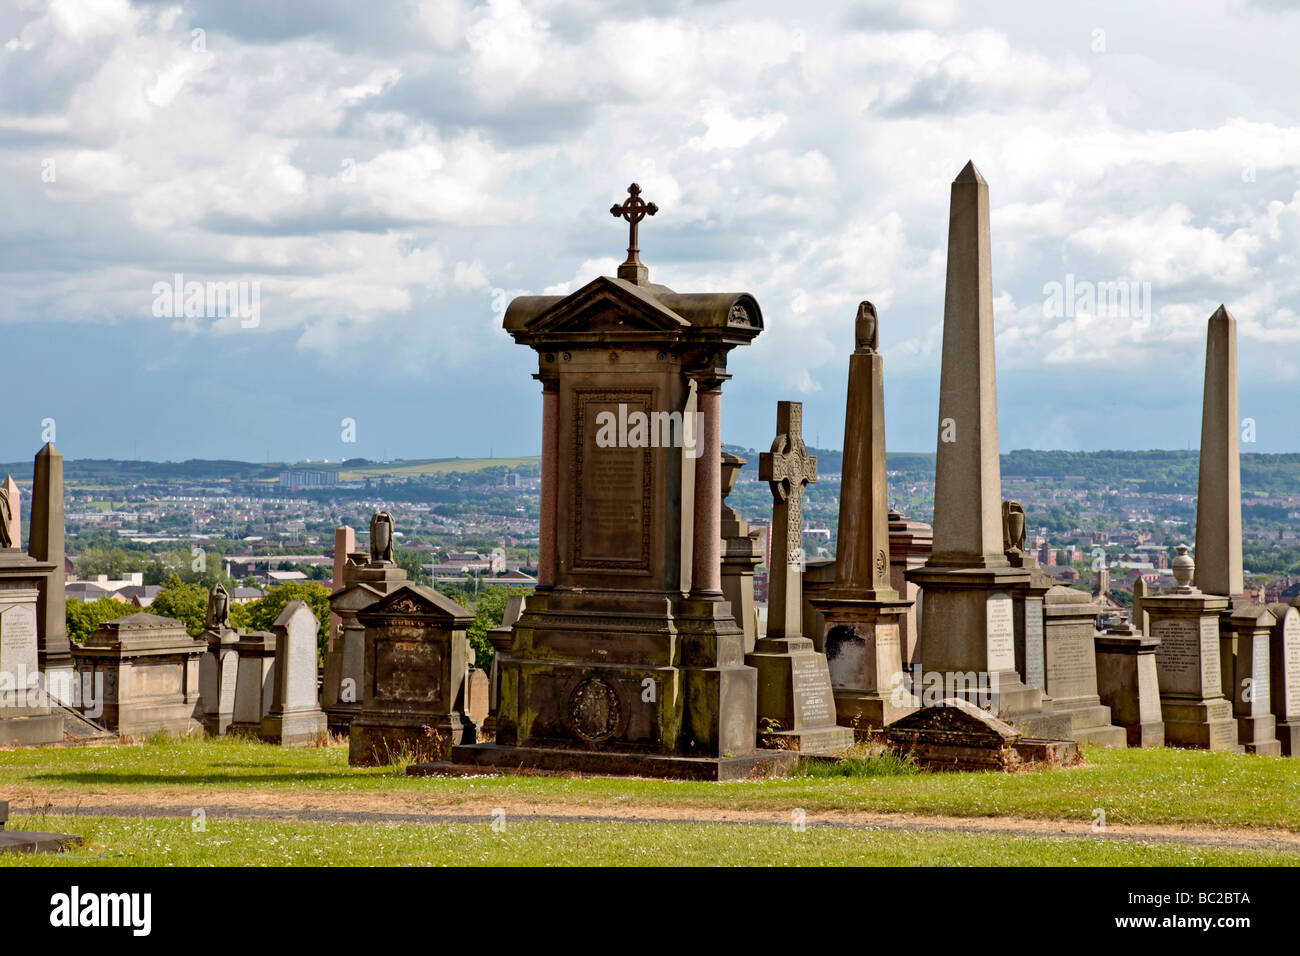 Monuments and memorials at Glasgow's Victorian Museum, the Necropolis, with its hilltop view over the city. Stock Photo